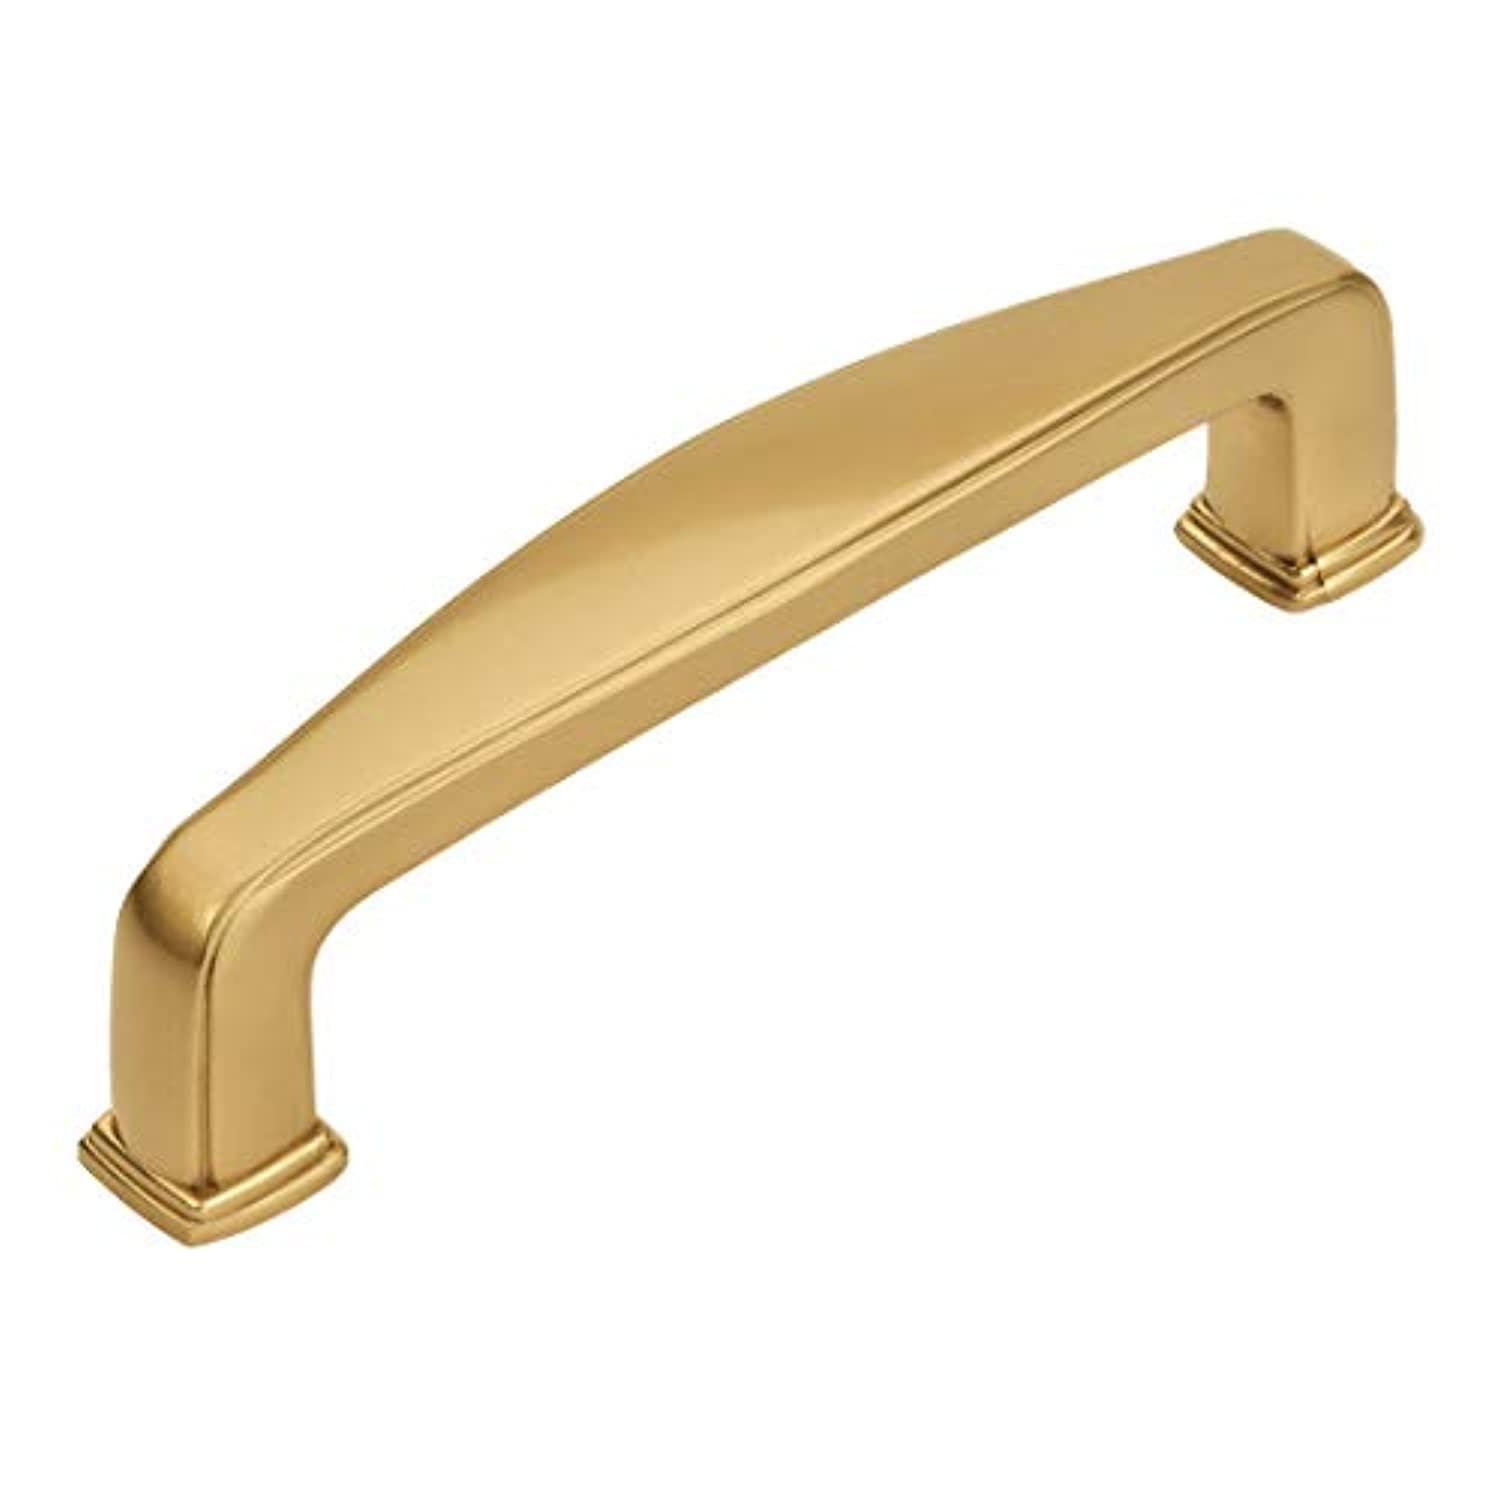 COSMAS 10 pack - cosmas 4390gc gold champagne modern cabinet hardware handle pull - 3-1/2" inch (89mm) hole centers